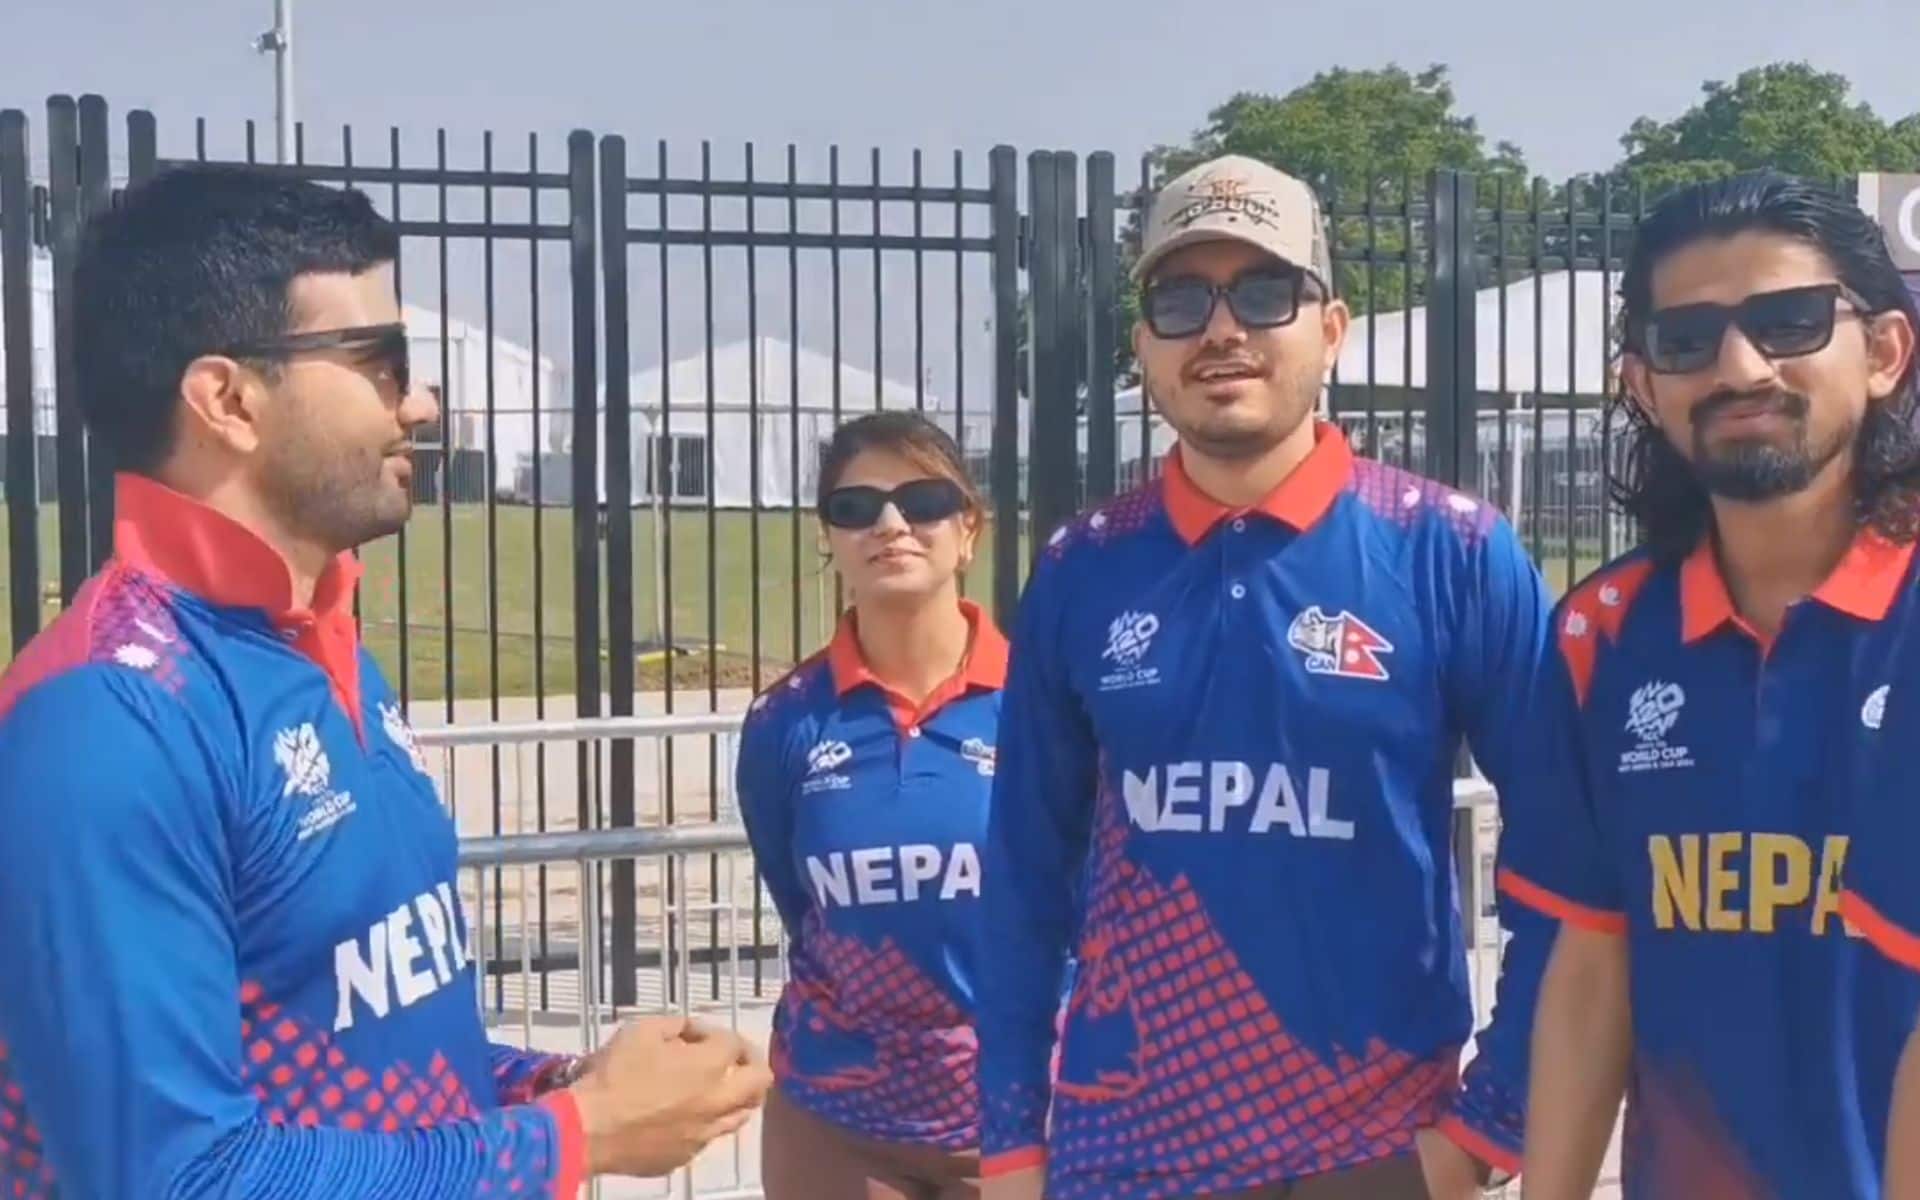 Nepal Cricket Fans, Who Travelled Hours, Denied Tickets For Canada Clash In Texas